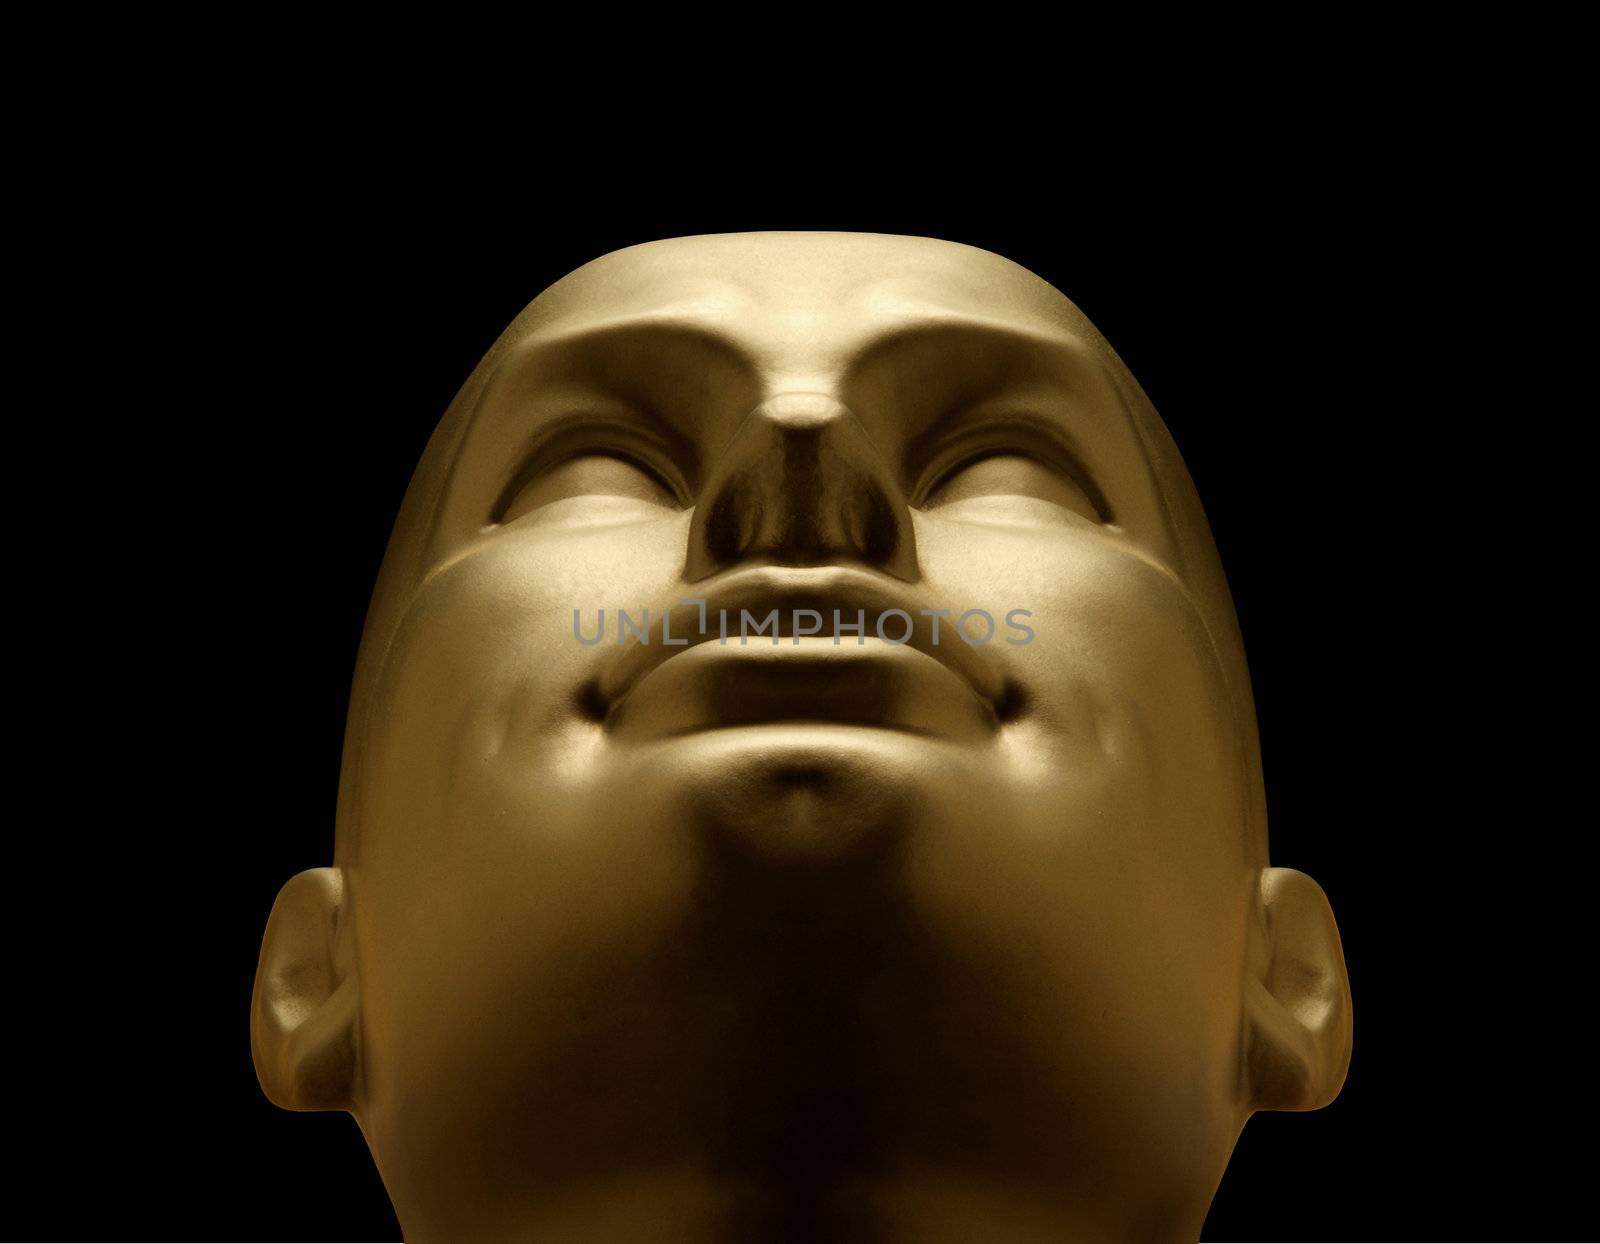 Gold mannequin head looking up against black background